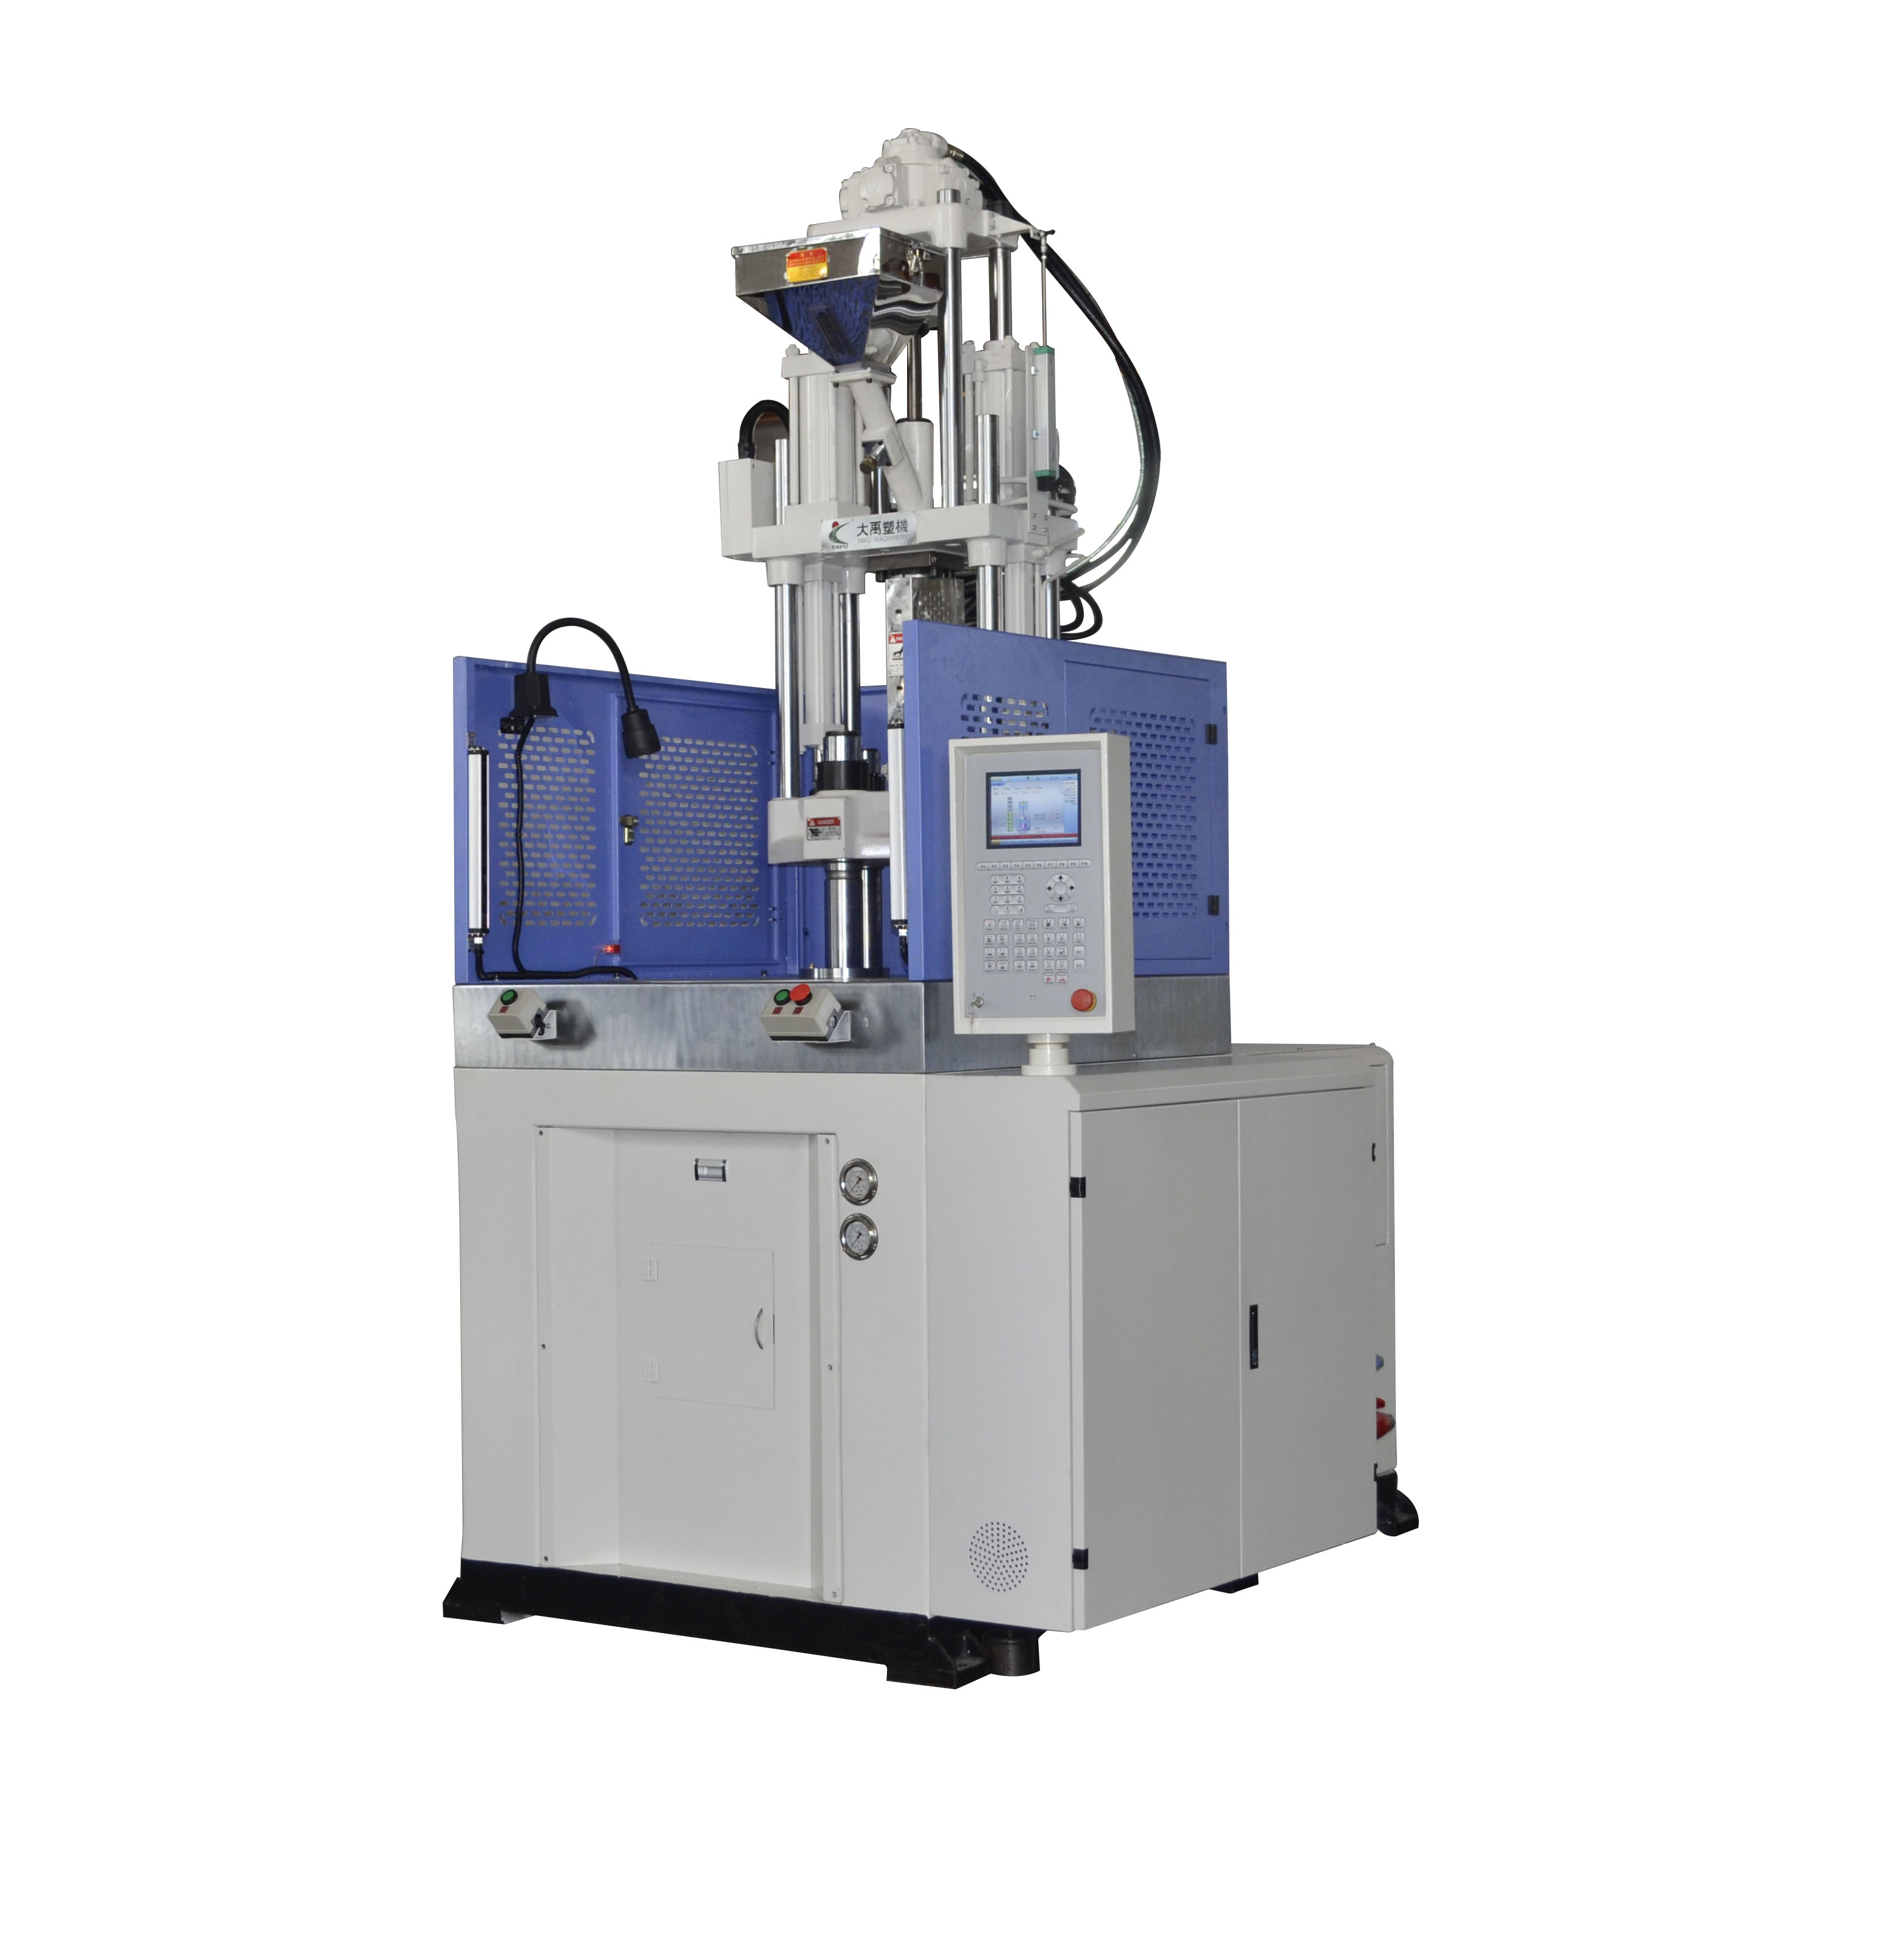 TY-850.2R injection molding machine